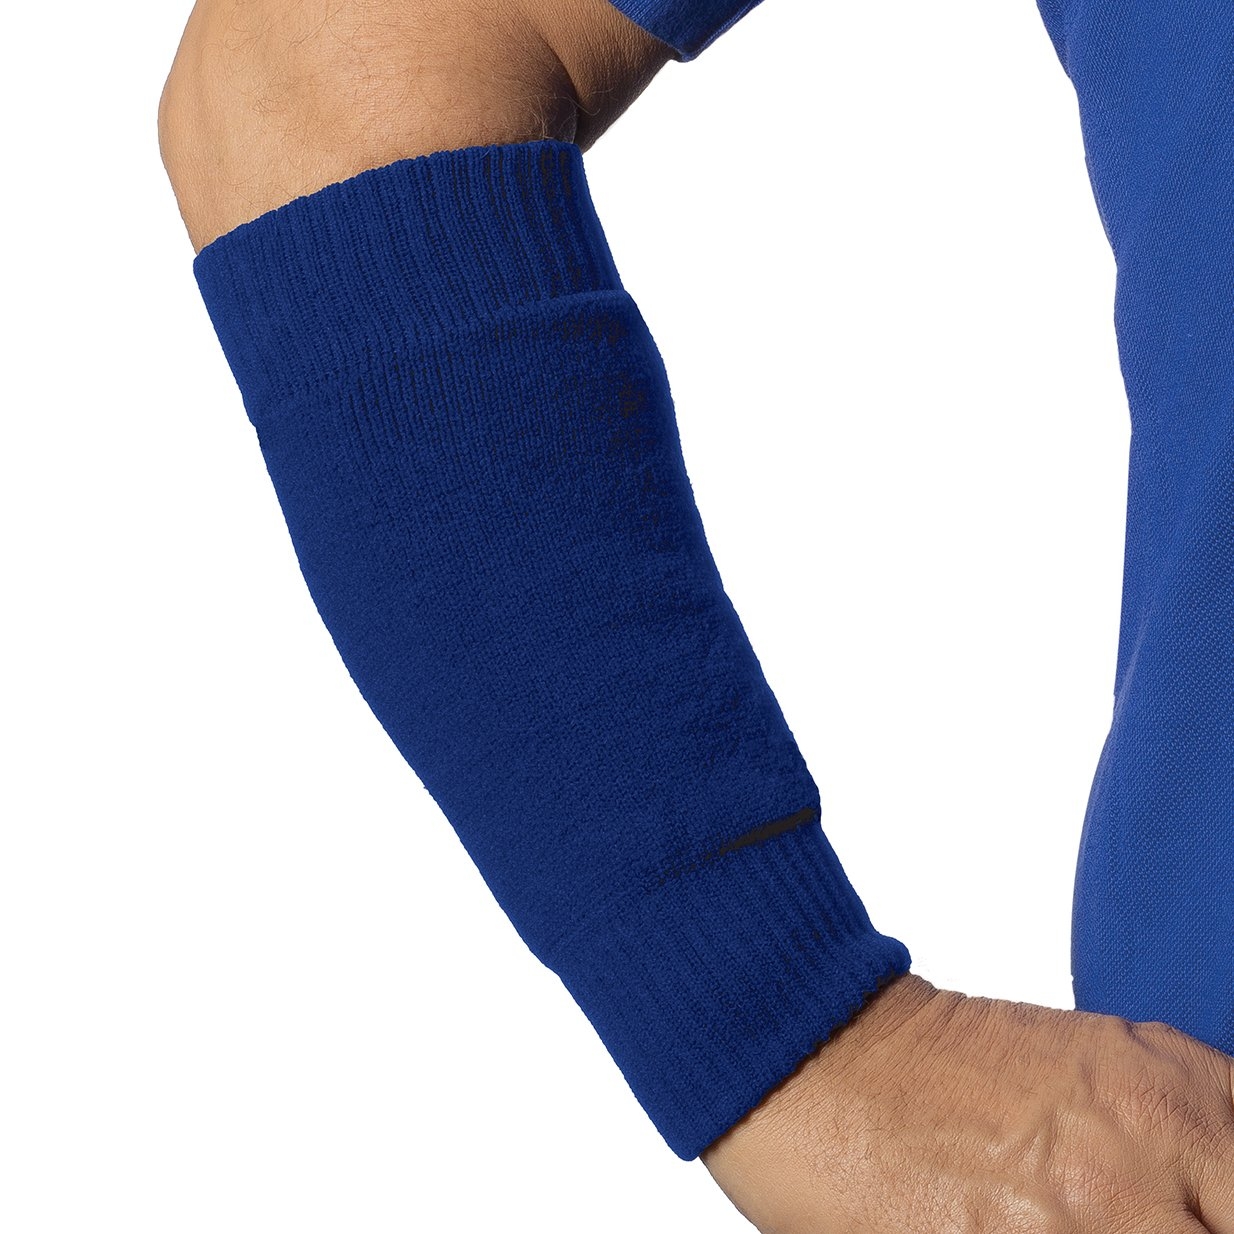 Forearm protectors for thin skin – Light Weight – Protect Frail Skin Navy – Limb Keepers